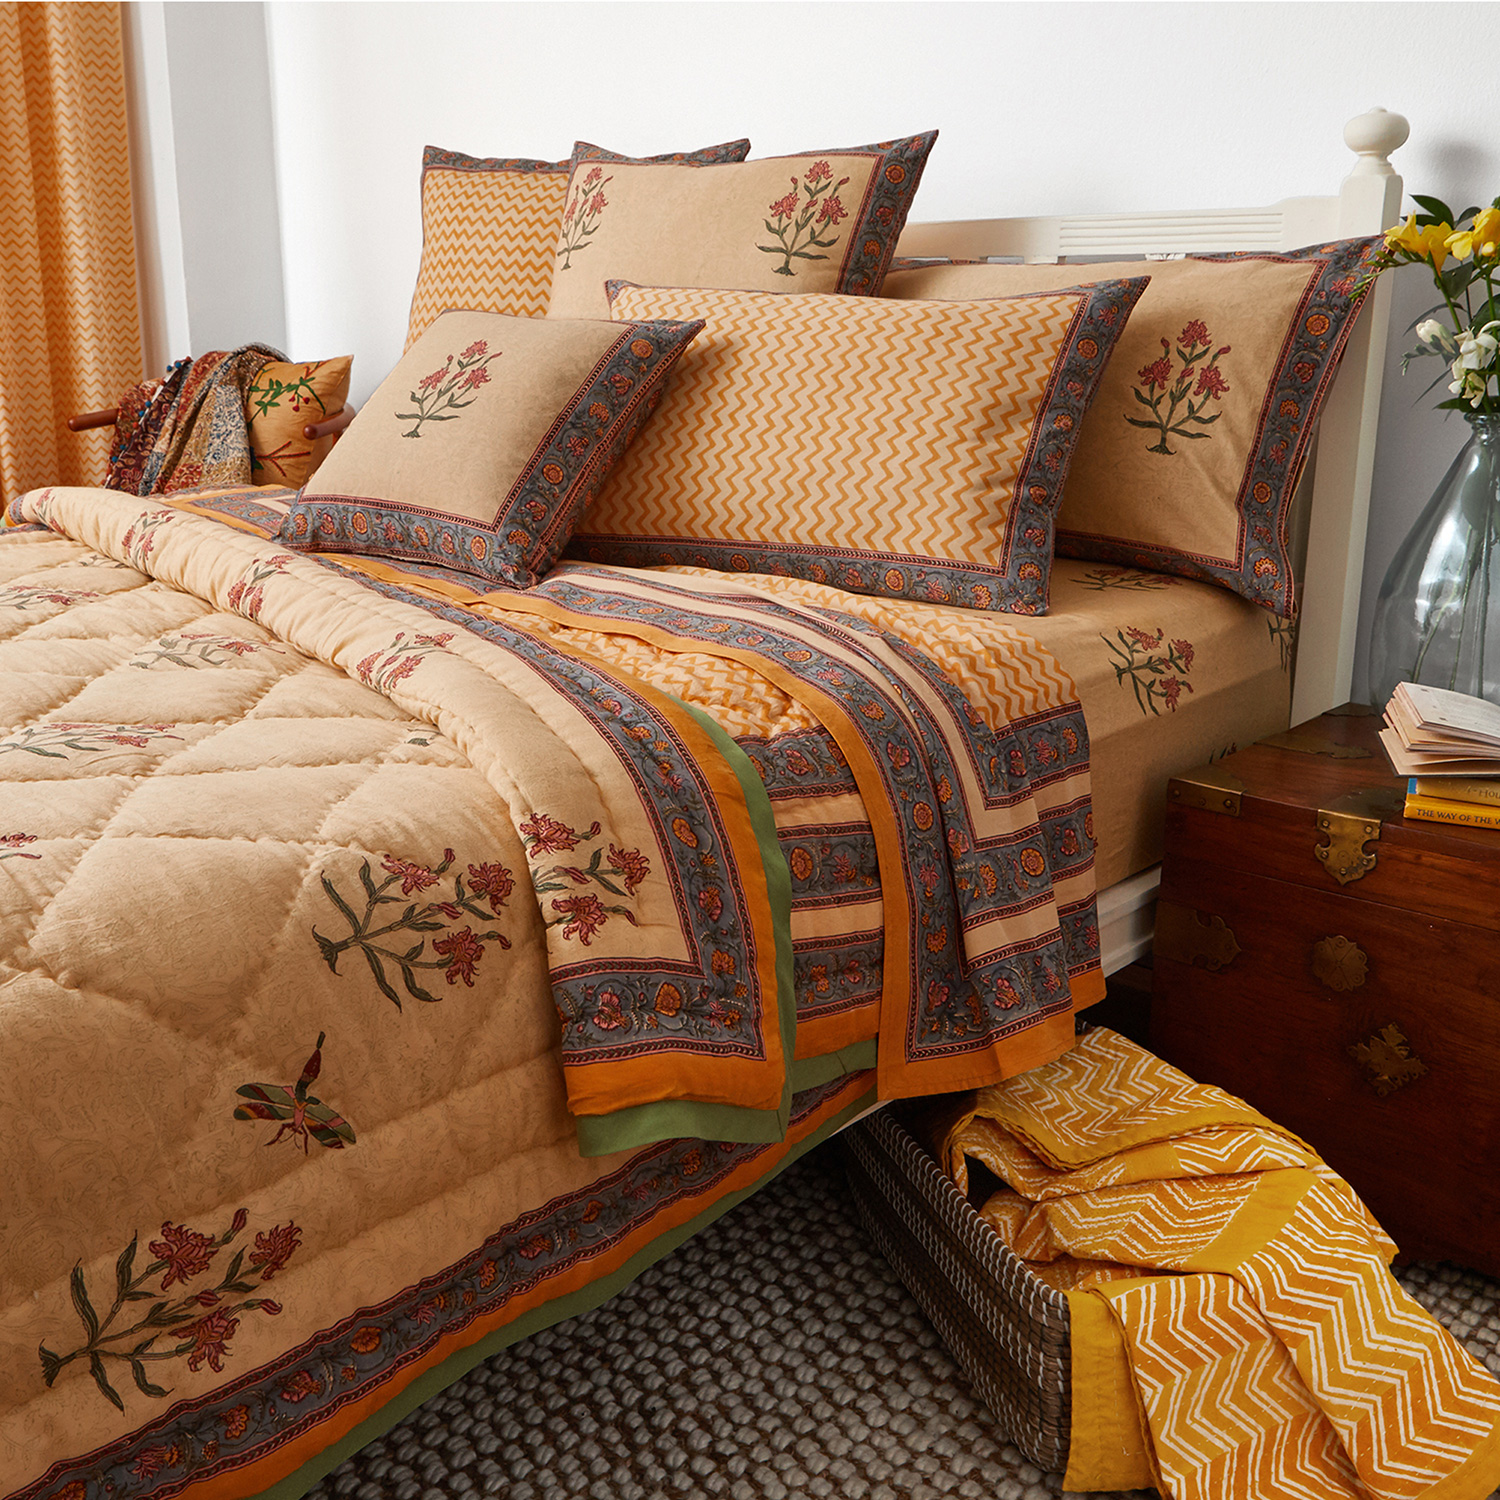 Indian Bedding Sets Handmade Block, Indian Style Duvet Covers